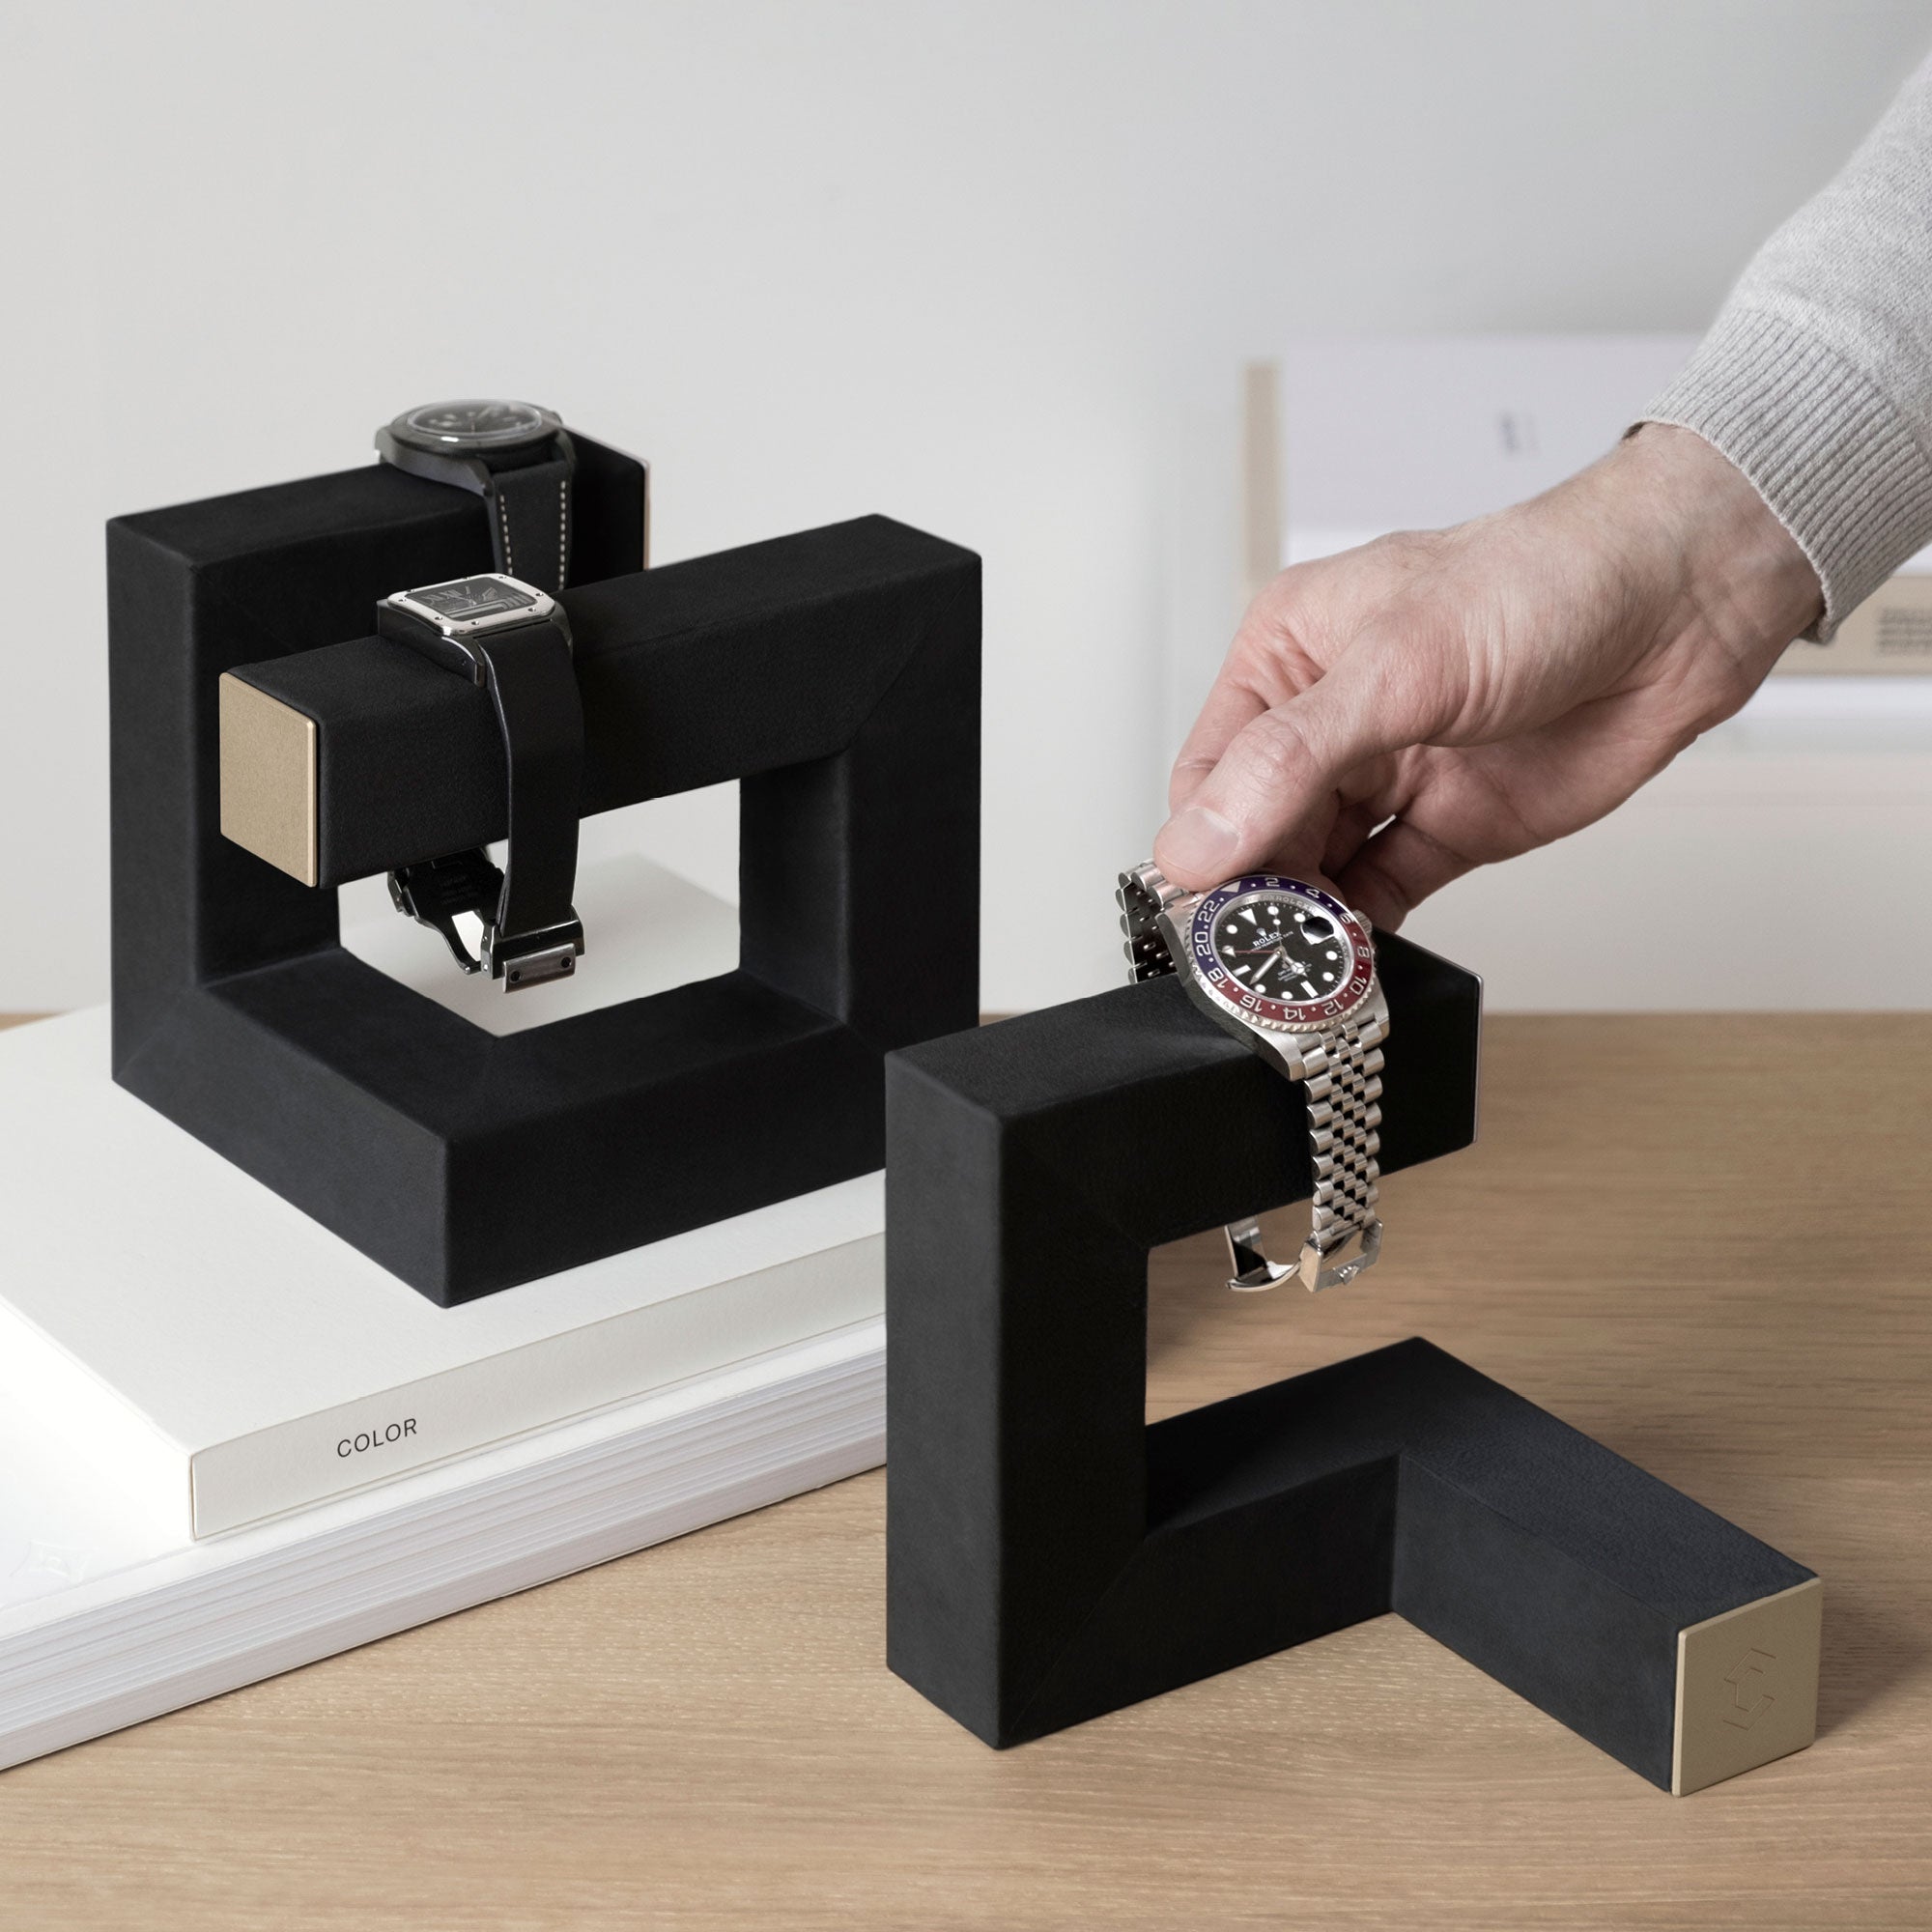 Two watch stands in black and gold displaying watches and serving as a minimalist sculptural piece in a minimalist home